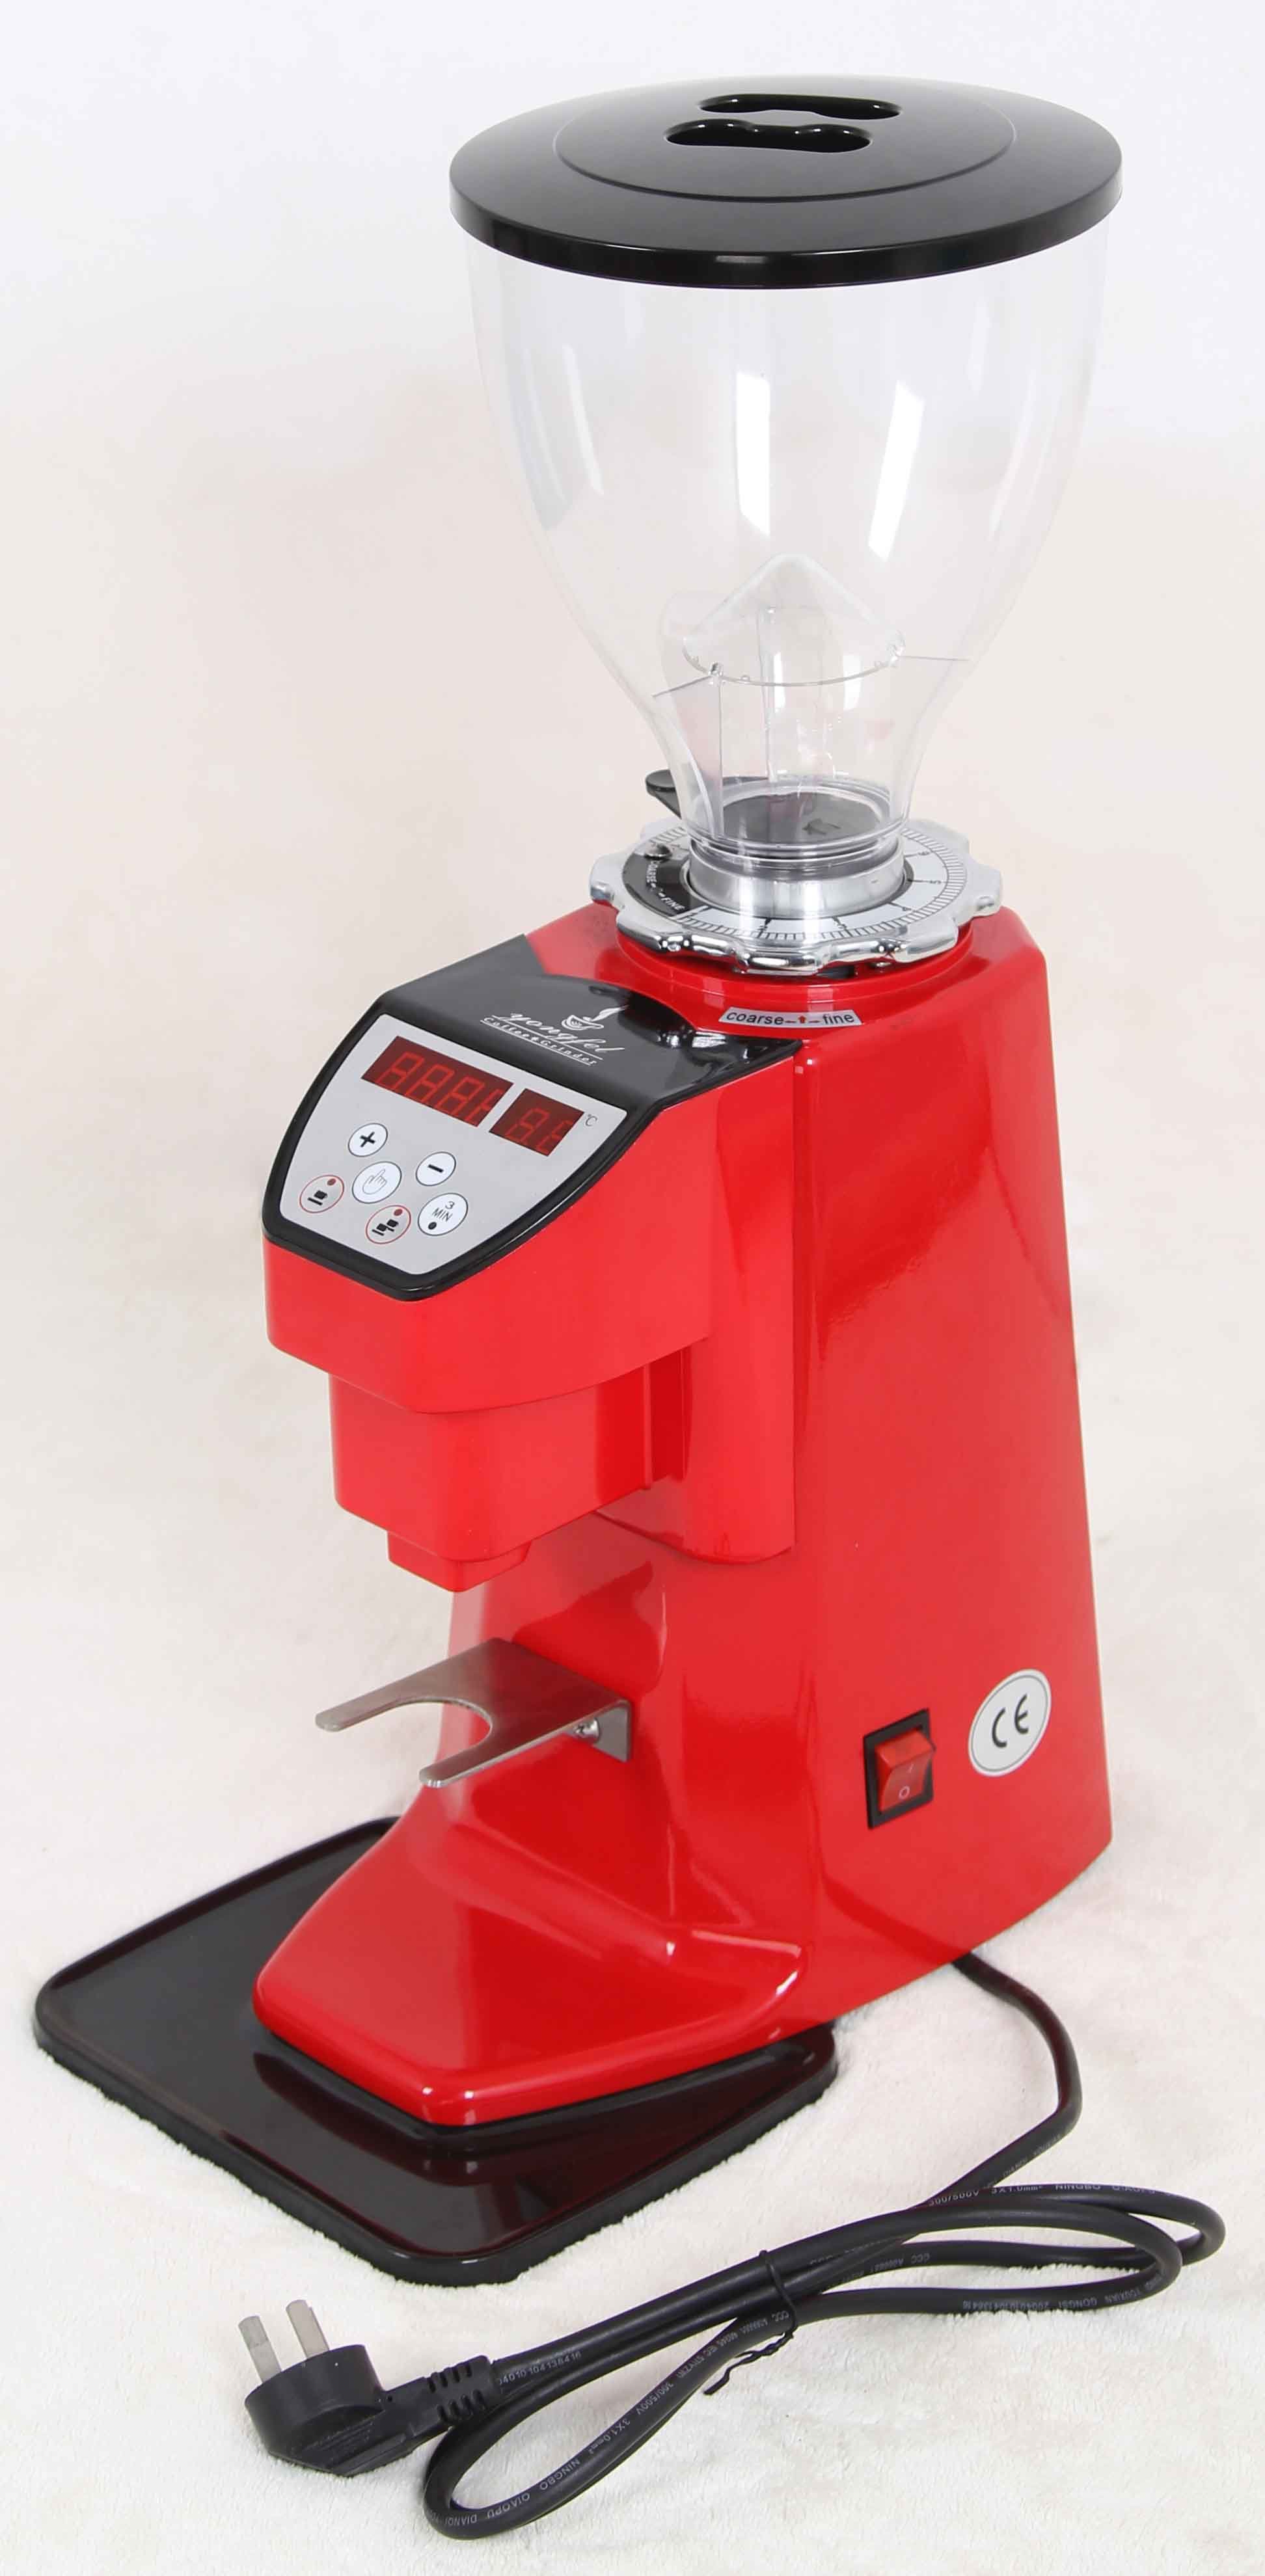 on Demand Commercial Coffee Grinder Machine Coffee Maker Yf-650 T2